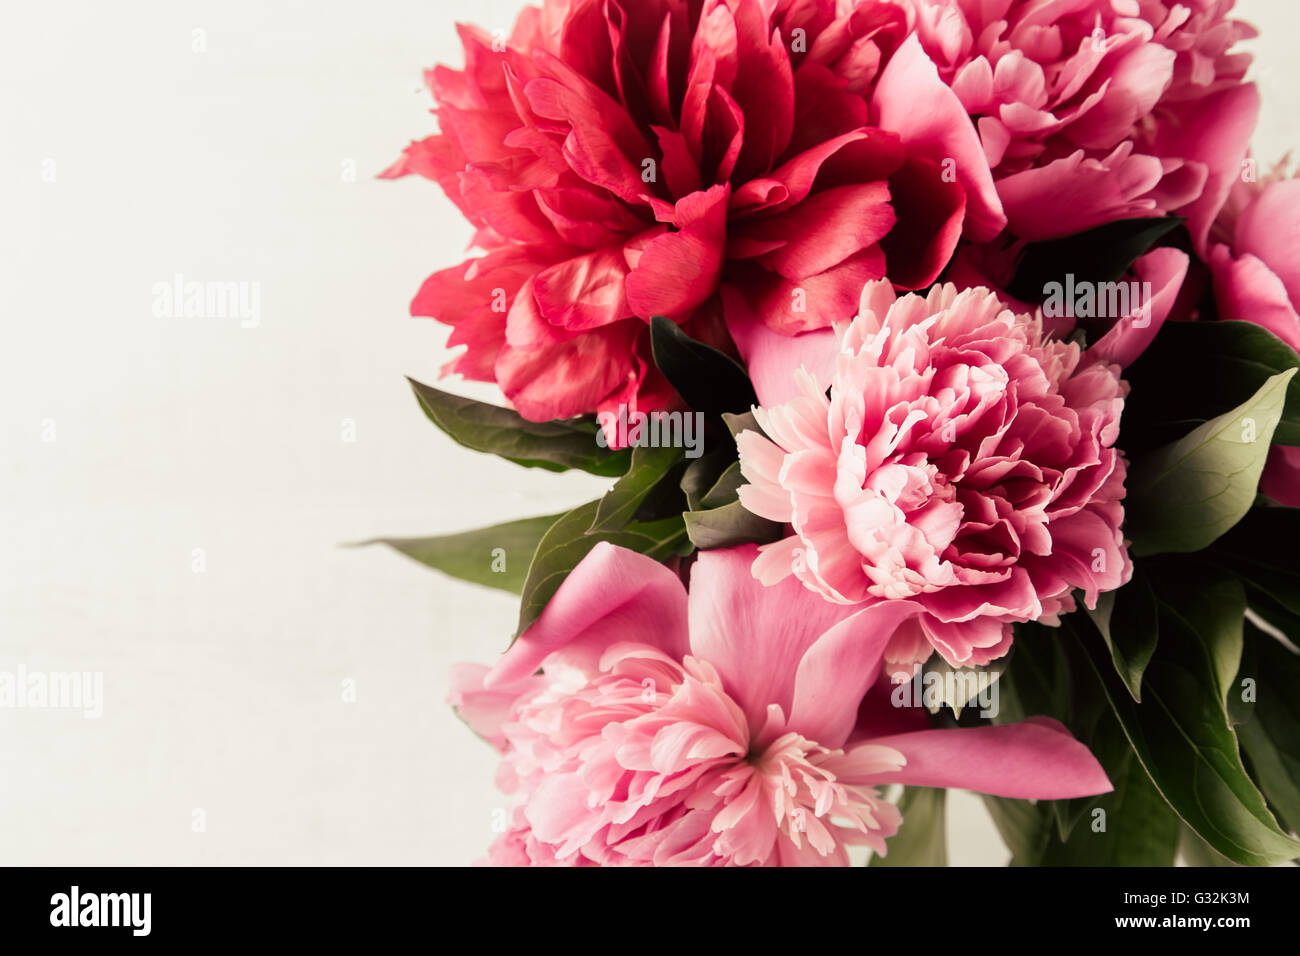 Summer floral background with pink and red peonies Stock Photo